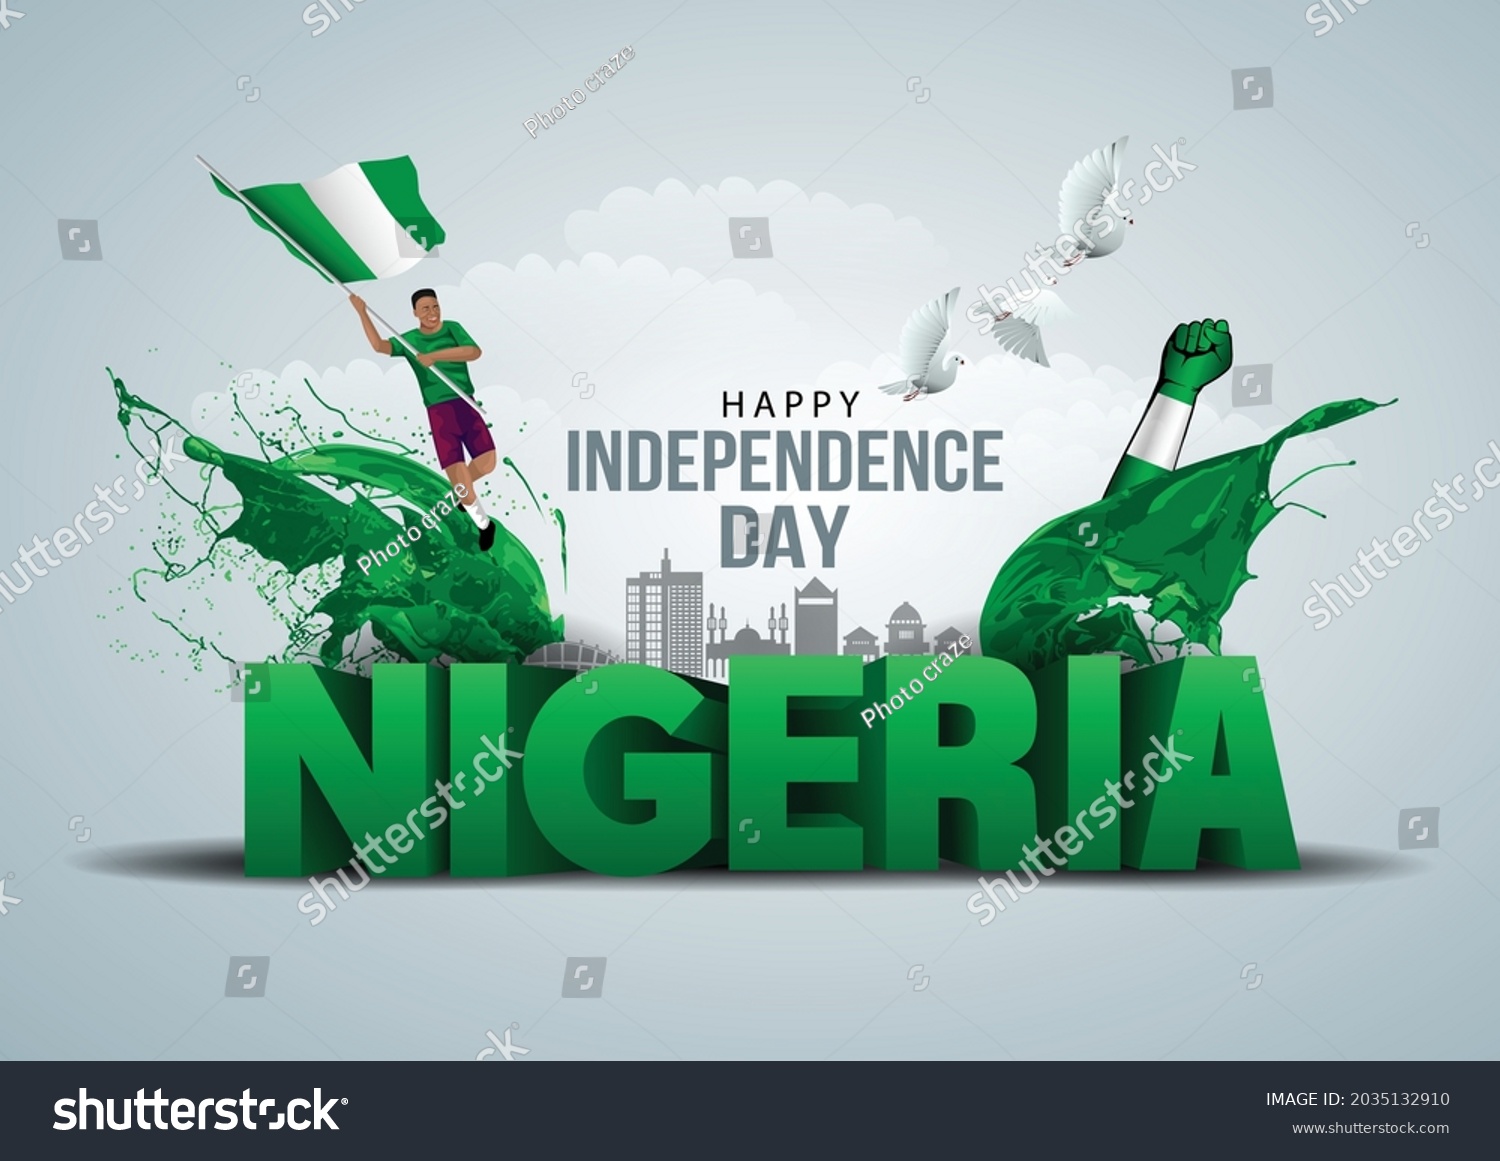 Nigeria independence day Images, Stock Photos & Vectors Shutterstock